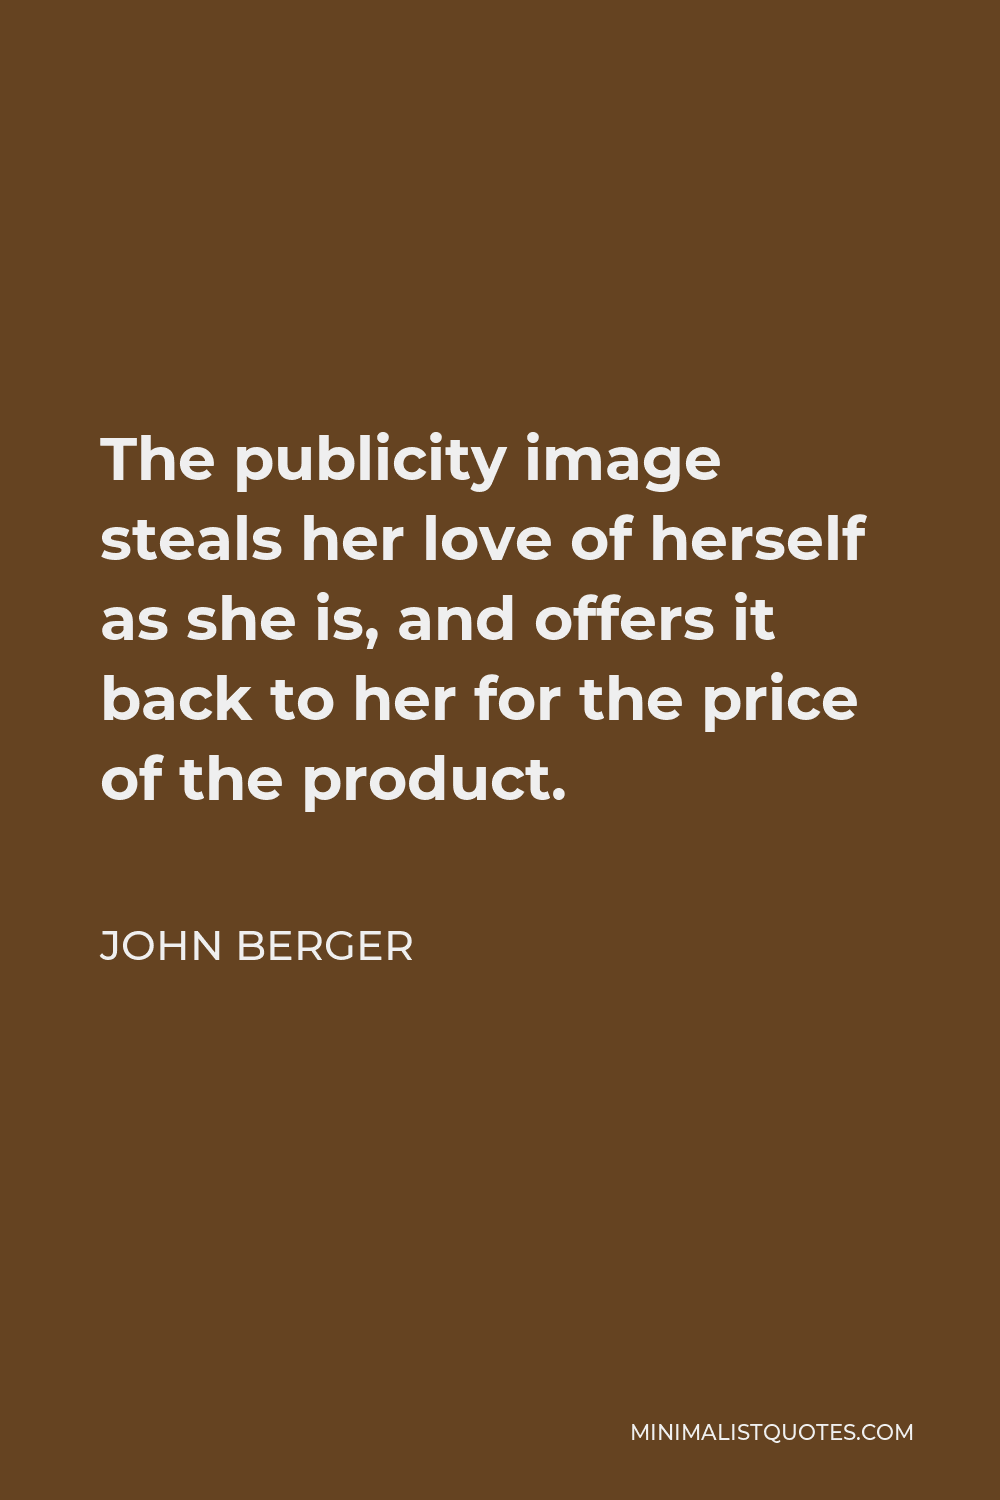 John Berger Quote - The publicity image steals her love of herself as she is, and offers it back to her for the price of the product.